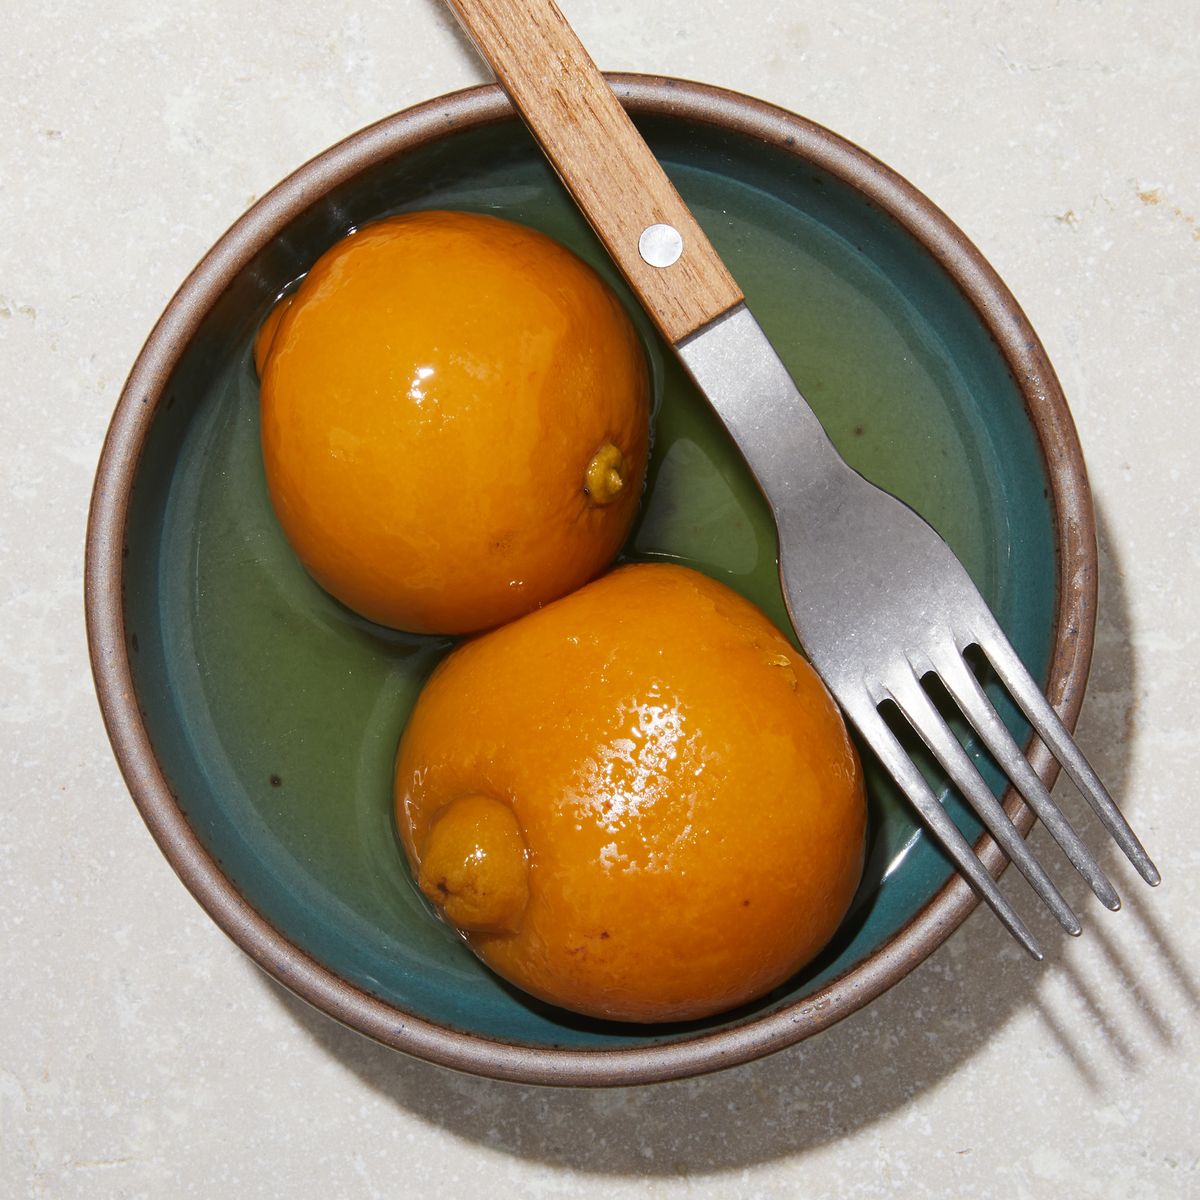 Two halves of a preserved lemons on a plate next to a fork